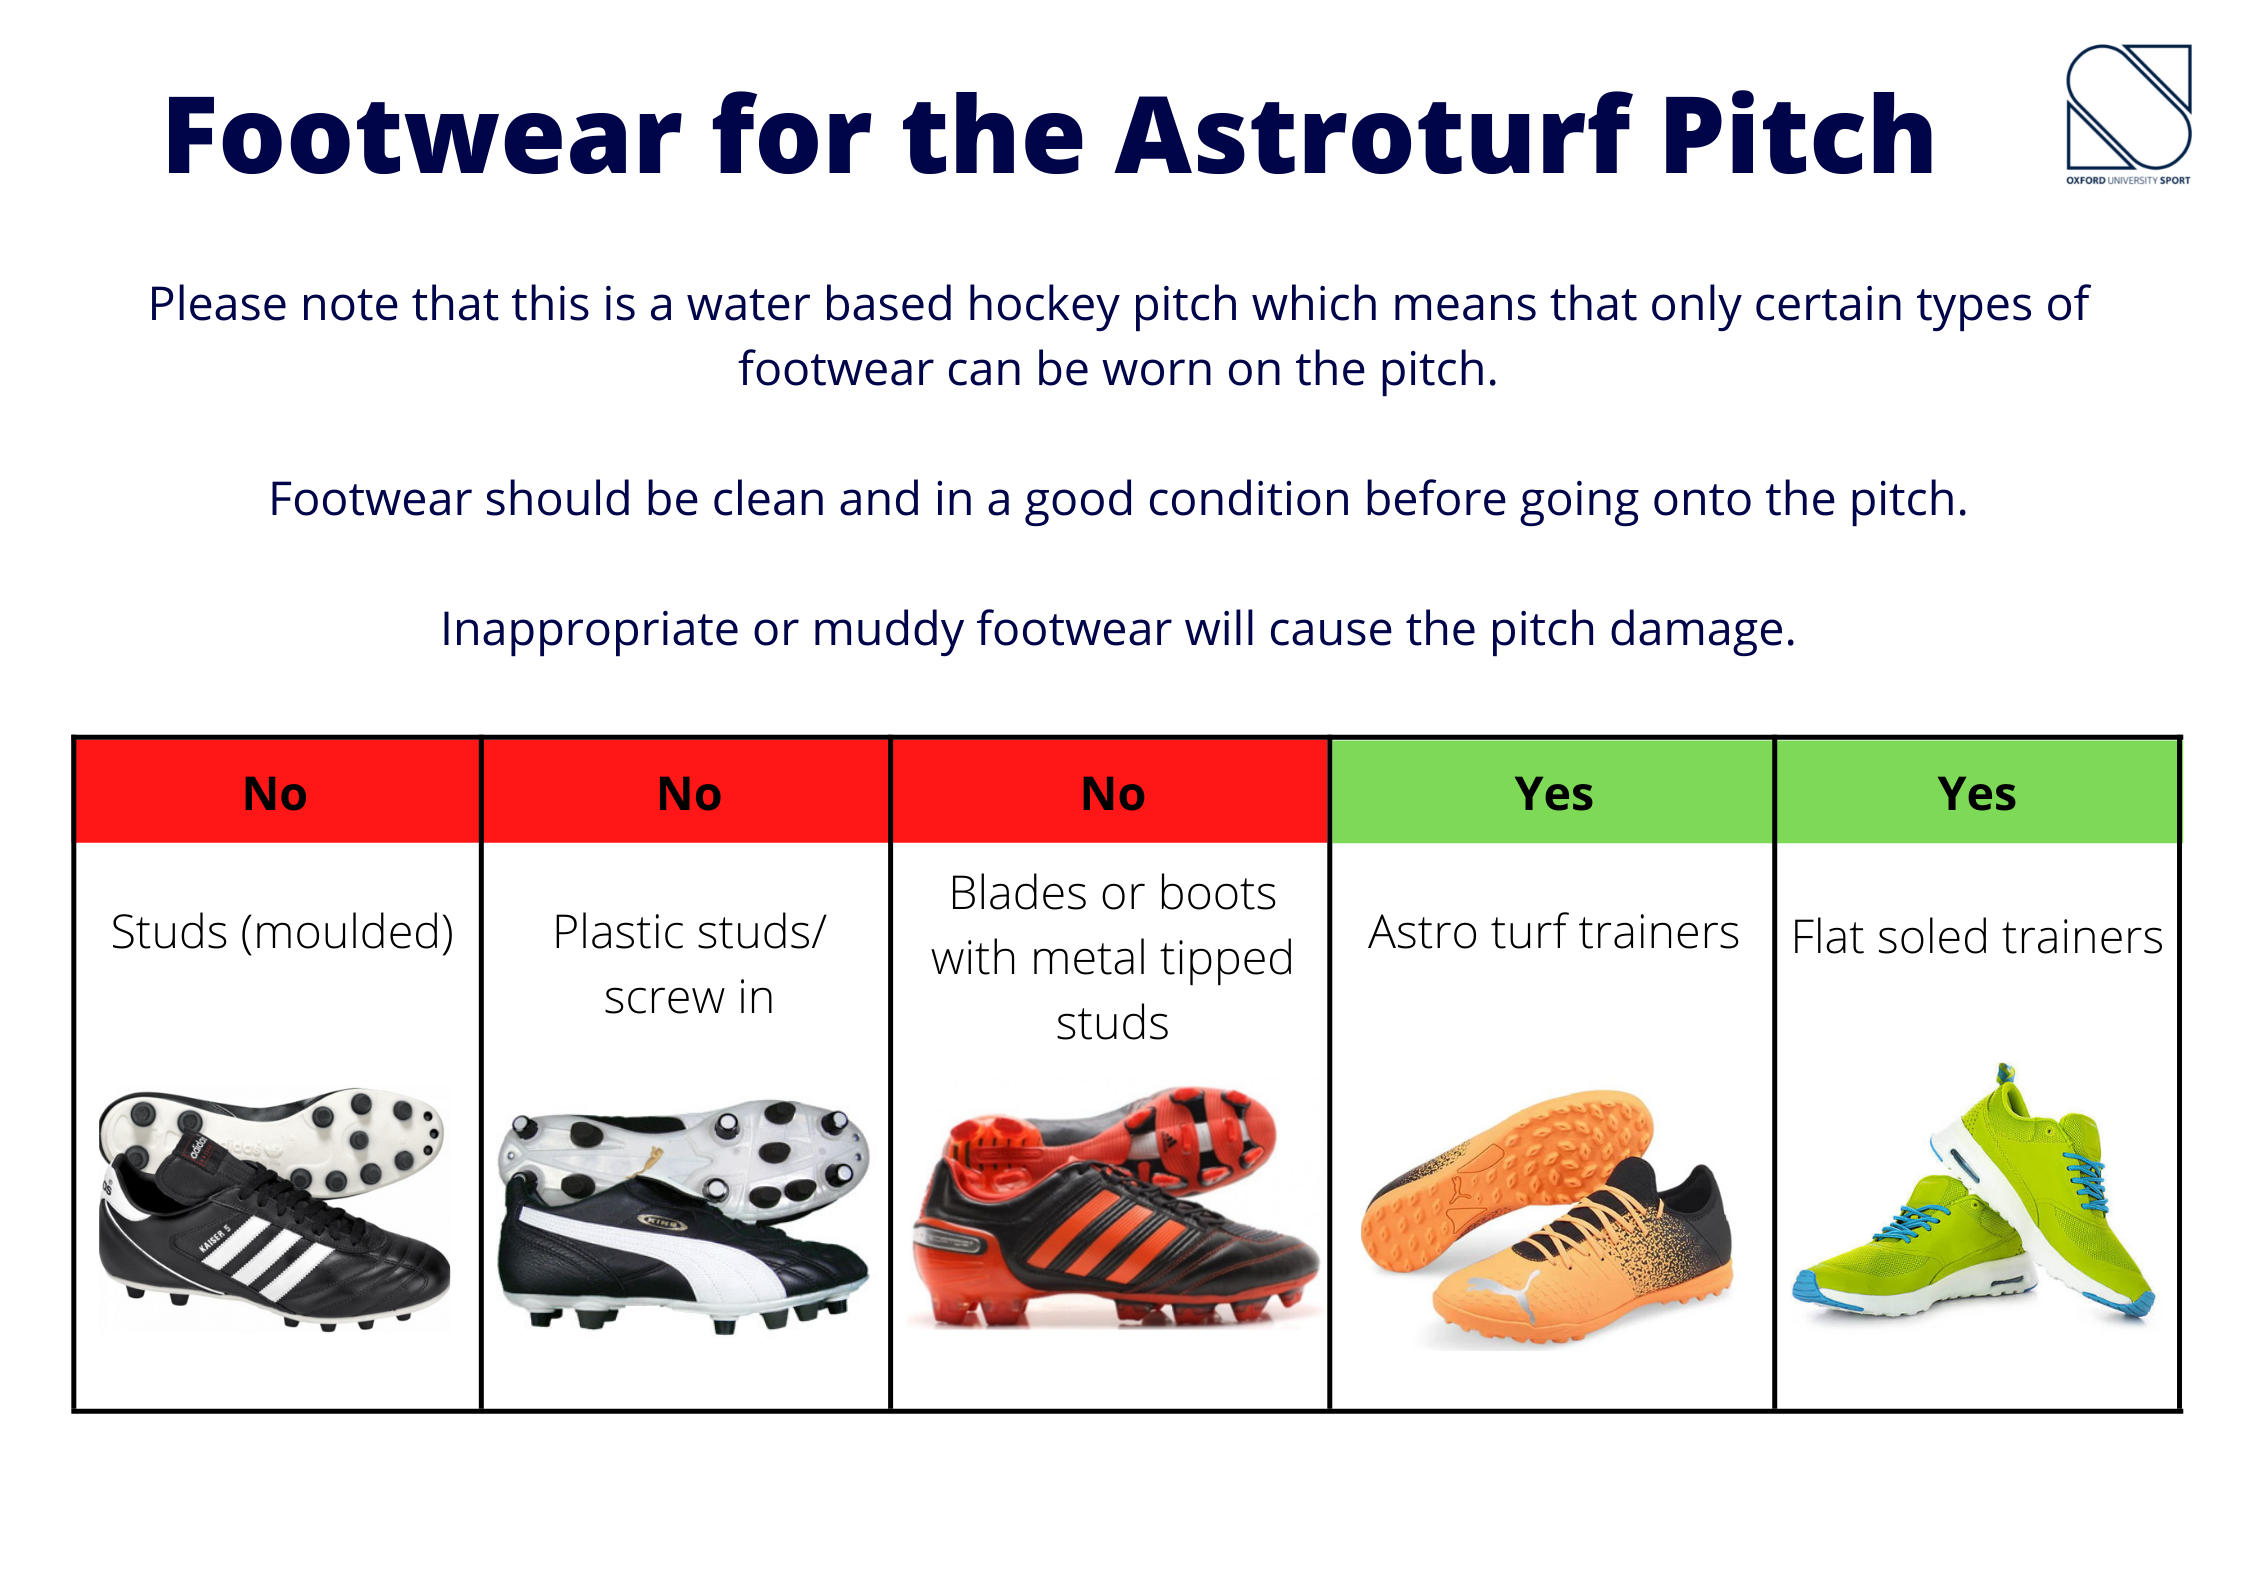 A graphic giving guidance on which footwear is suitable for use on the astroturf pitch